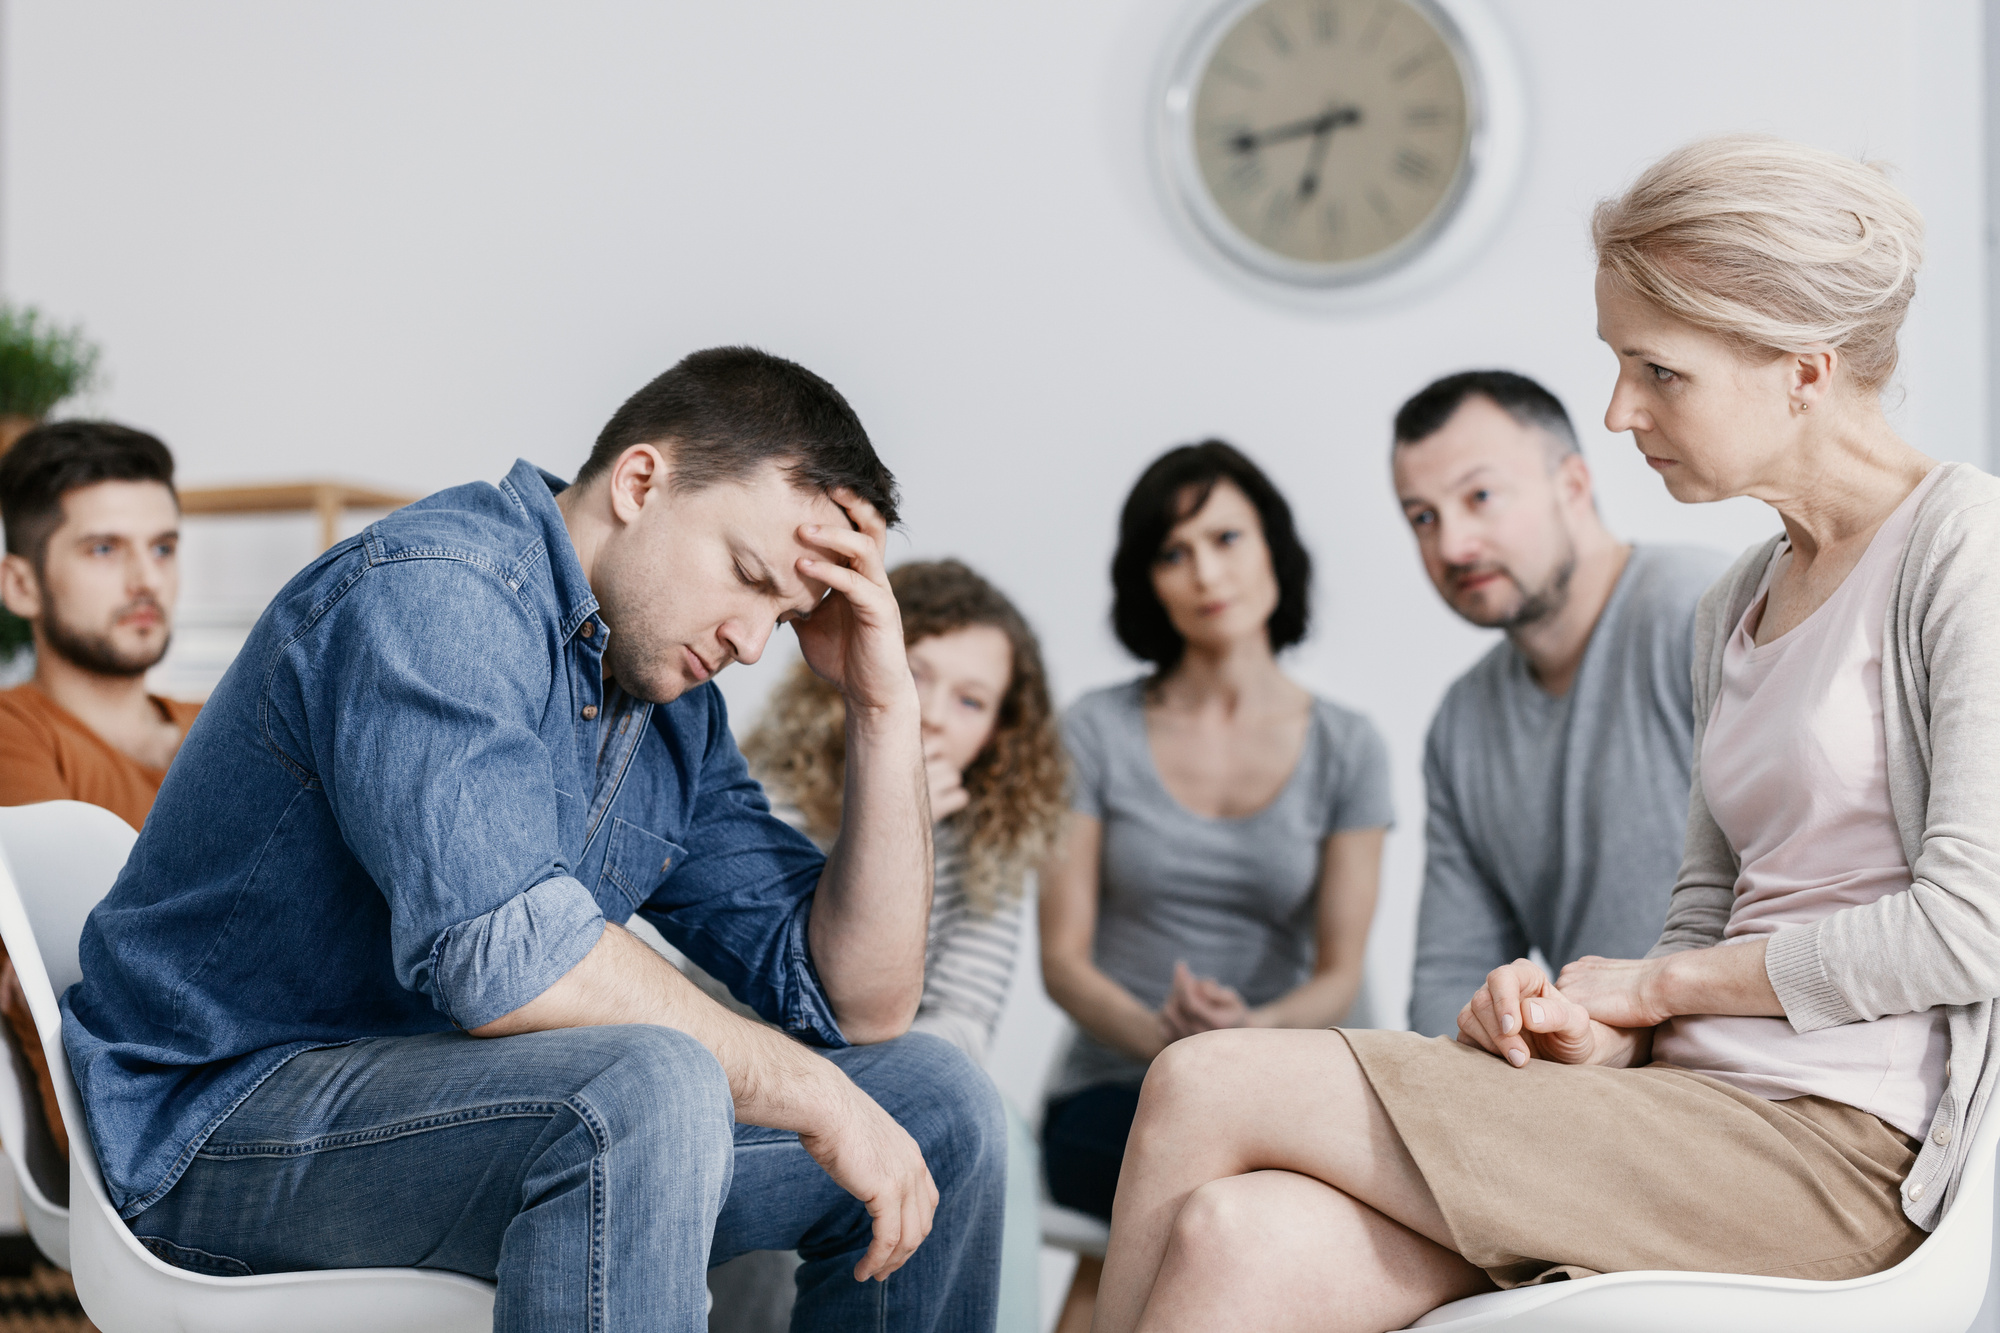 How to Support a Family Member Who is Fighting Addiction